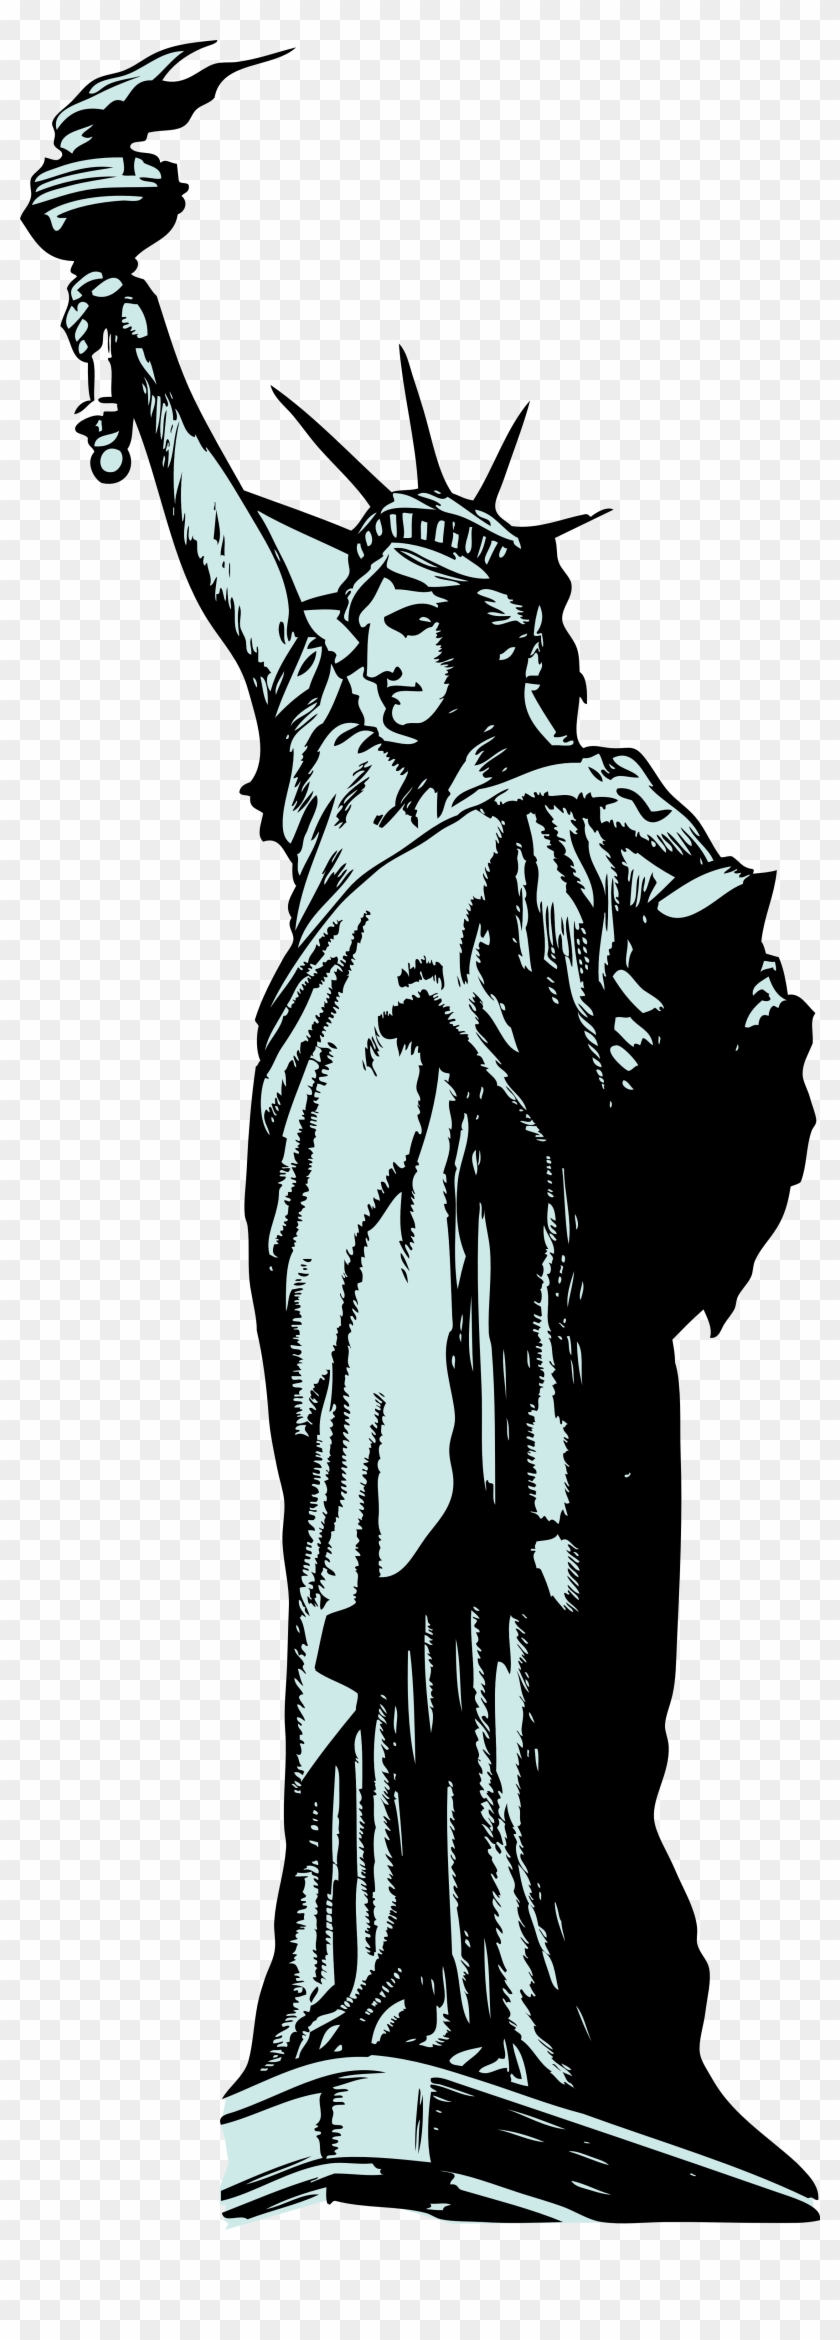 Clipart Statue Of Liberty - Statue Of Liberty Clipart Transparent Background #47104